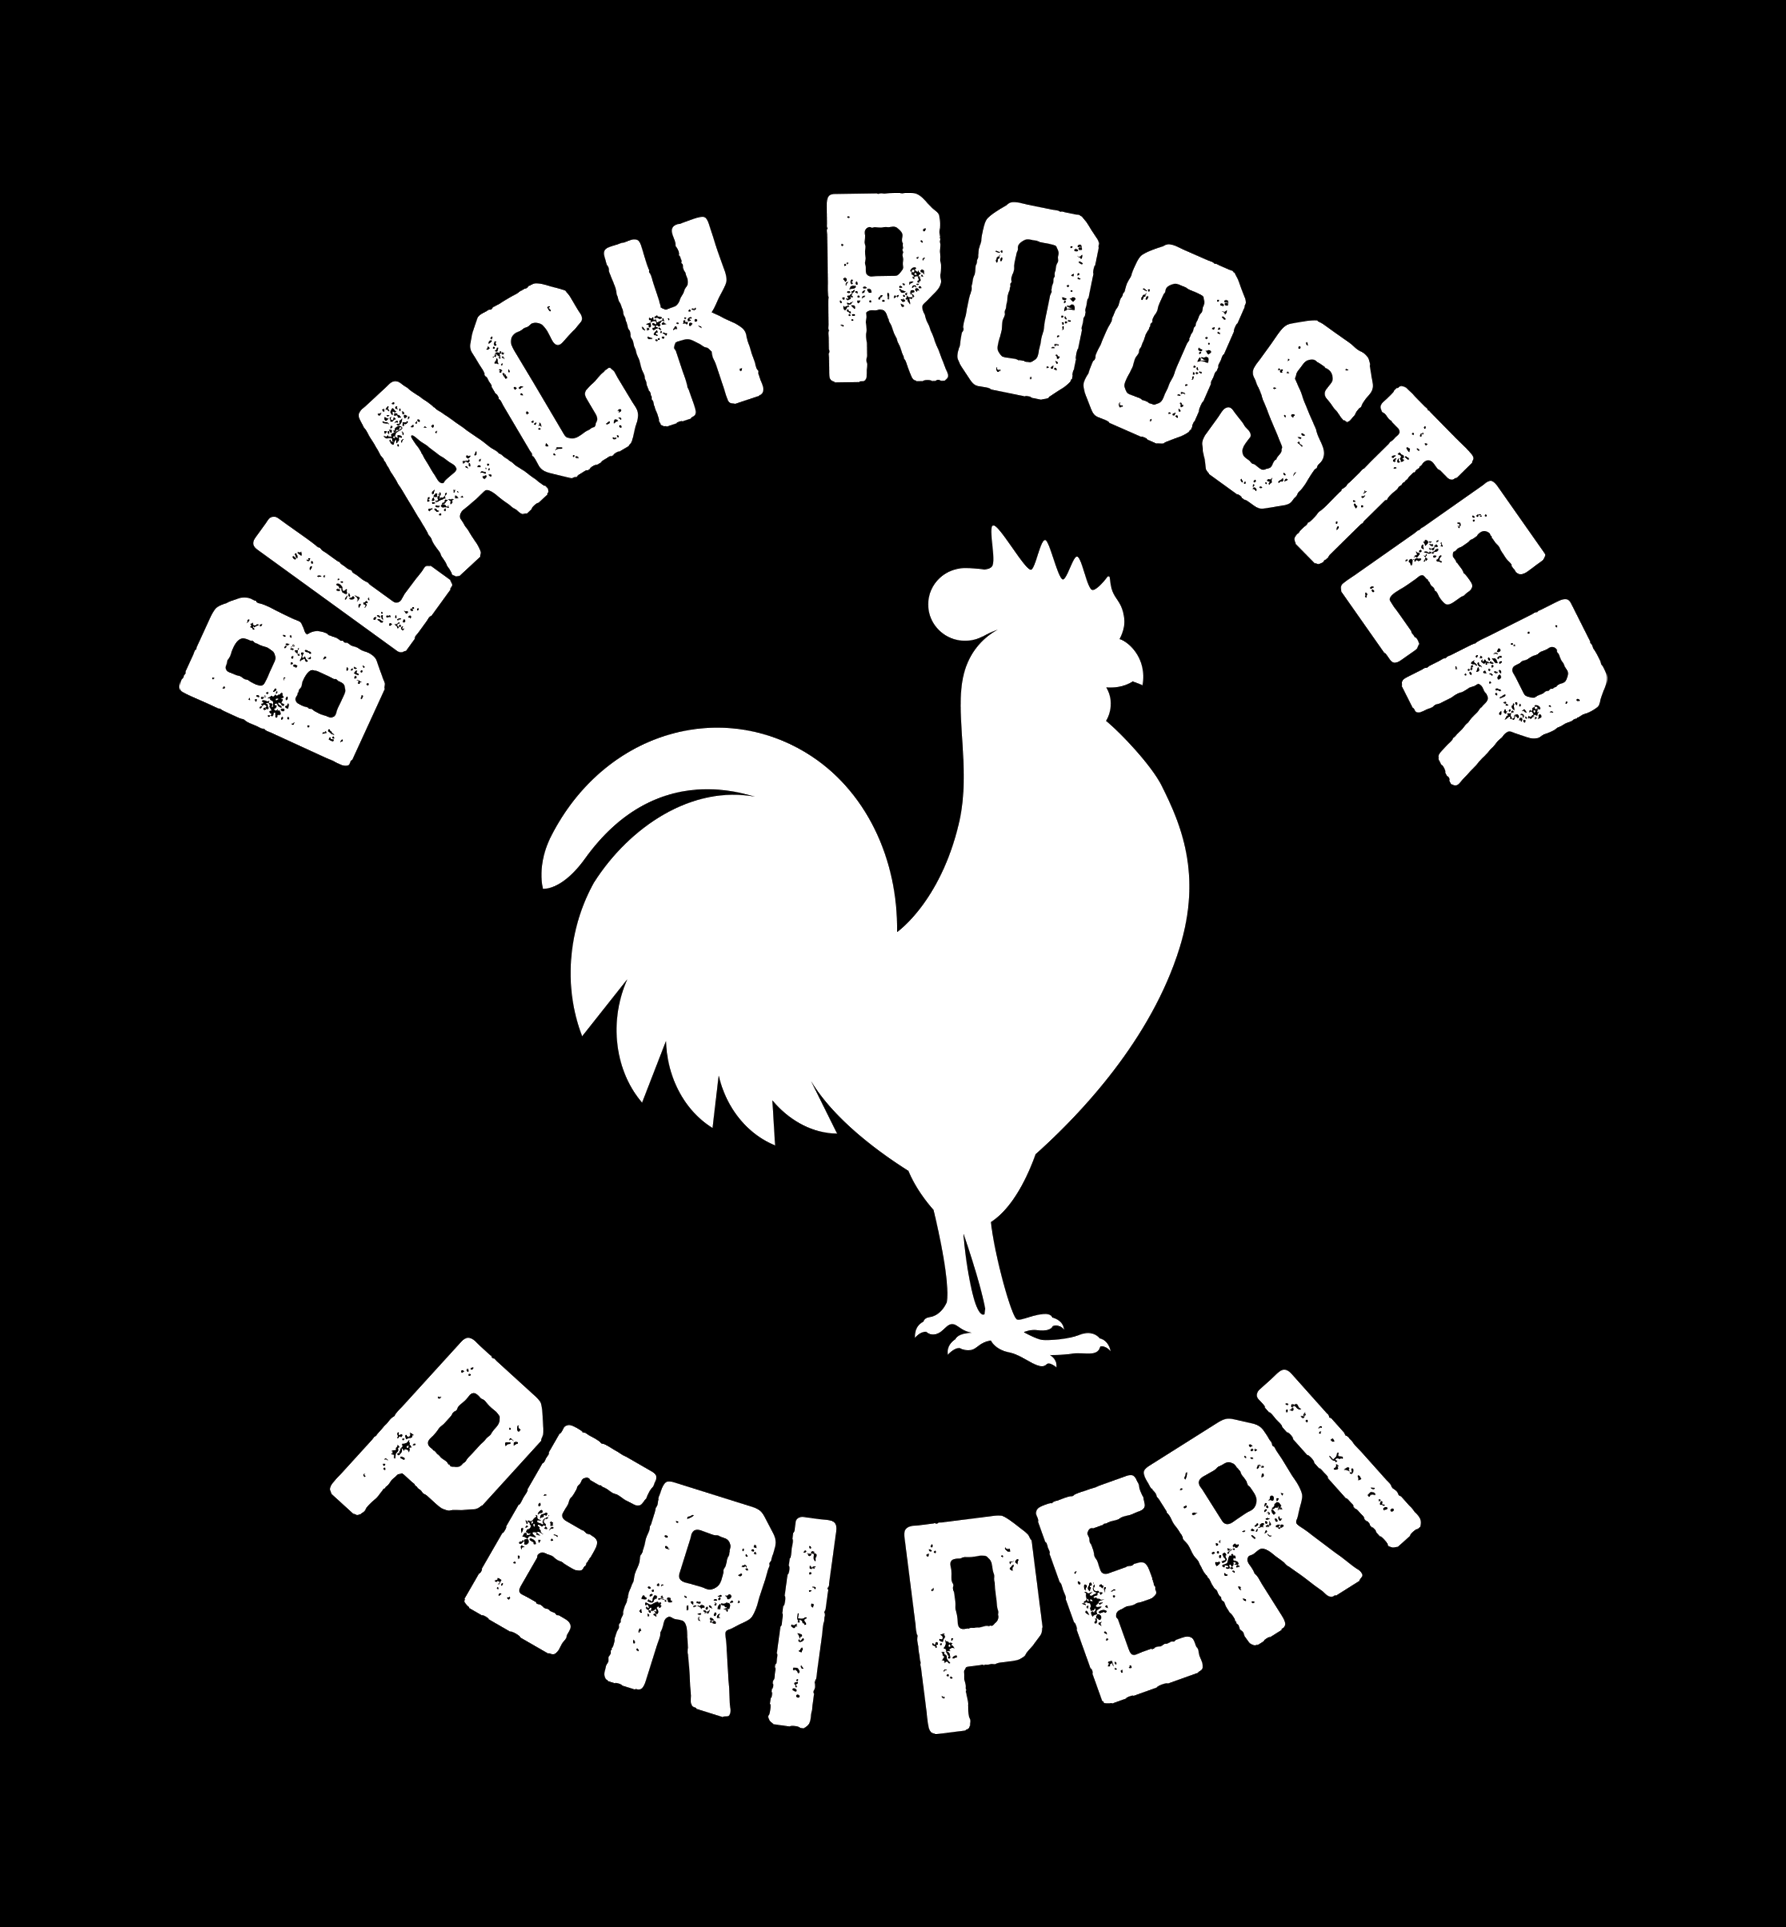 Black Rooster Food Safety / Health and Safety audit